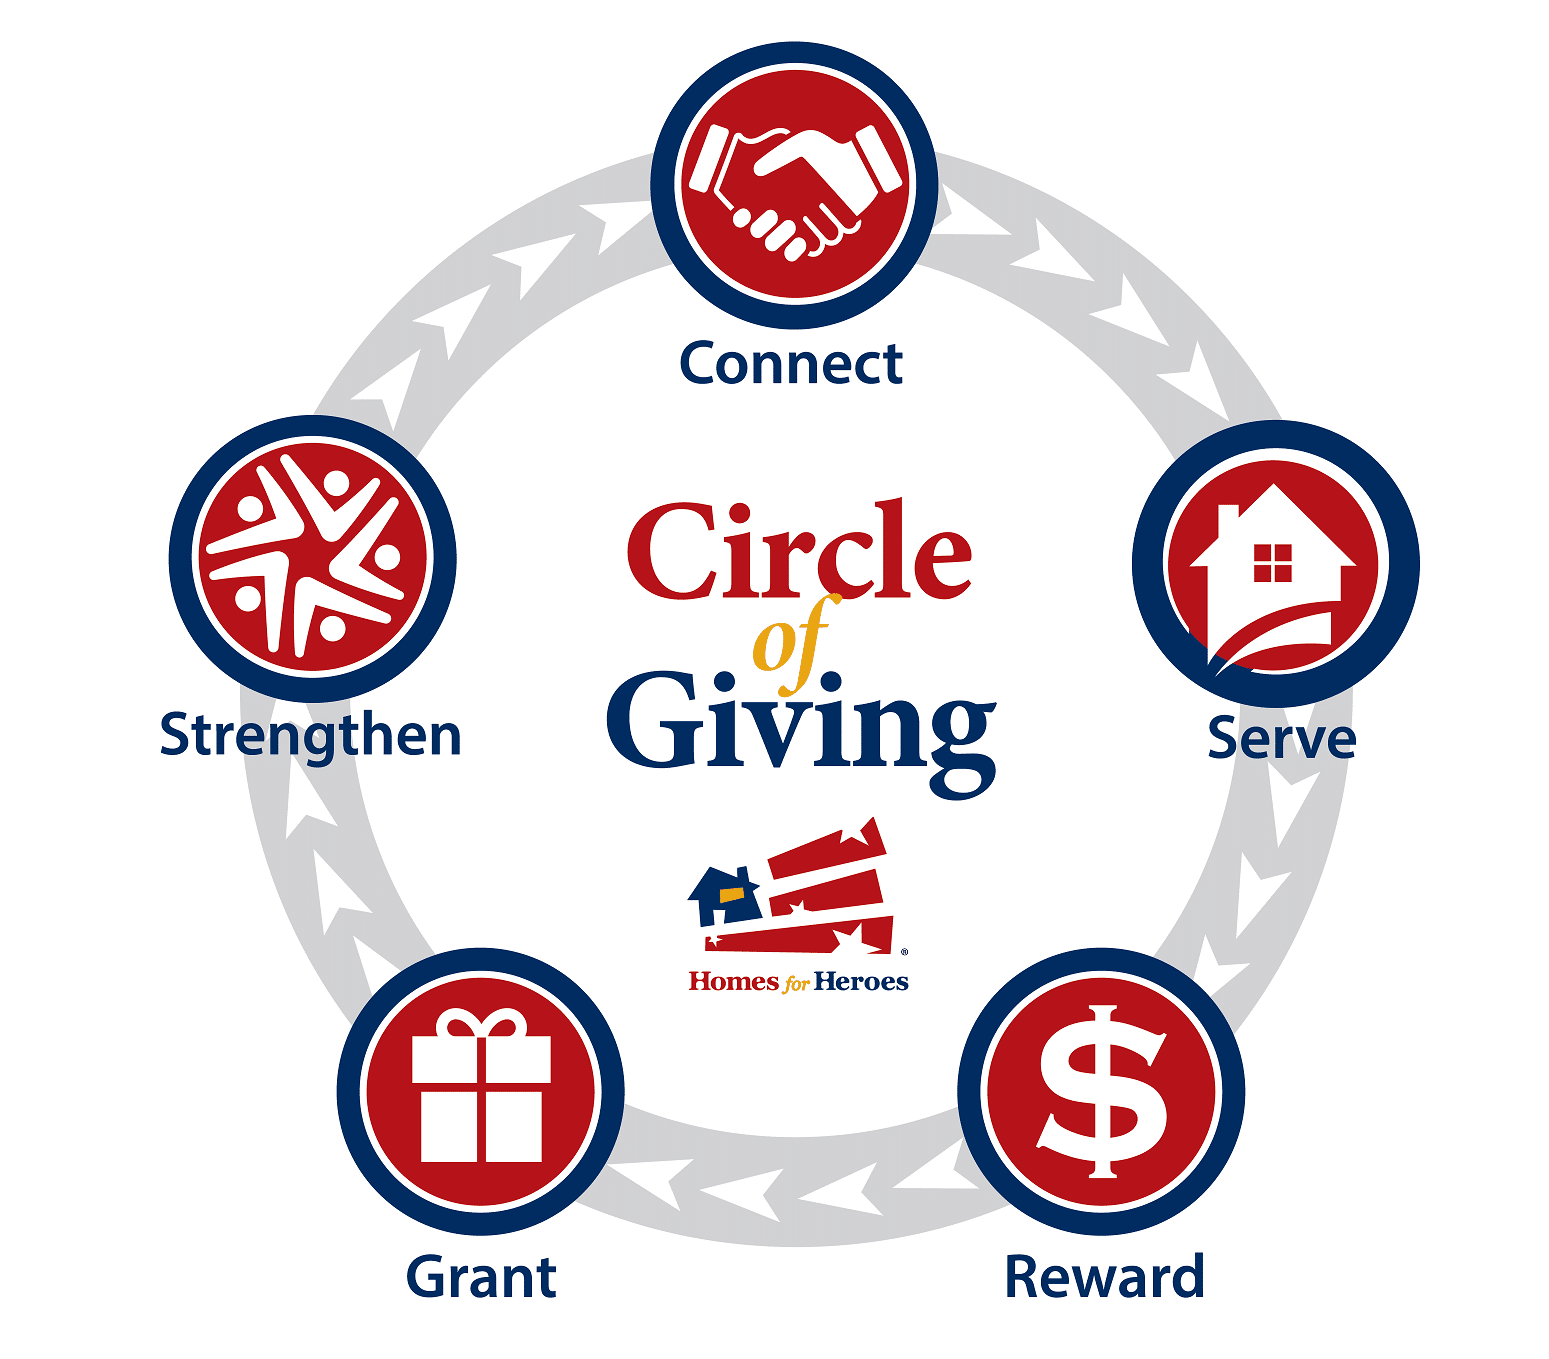 /wp-content/uploads/2020/03/Home-for-Heroes-Circle-of-Giving-MASTER-RGB-transparent-2019-01.png